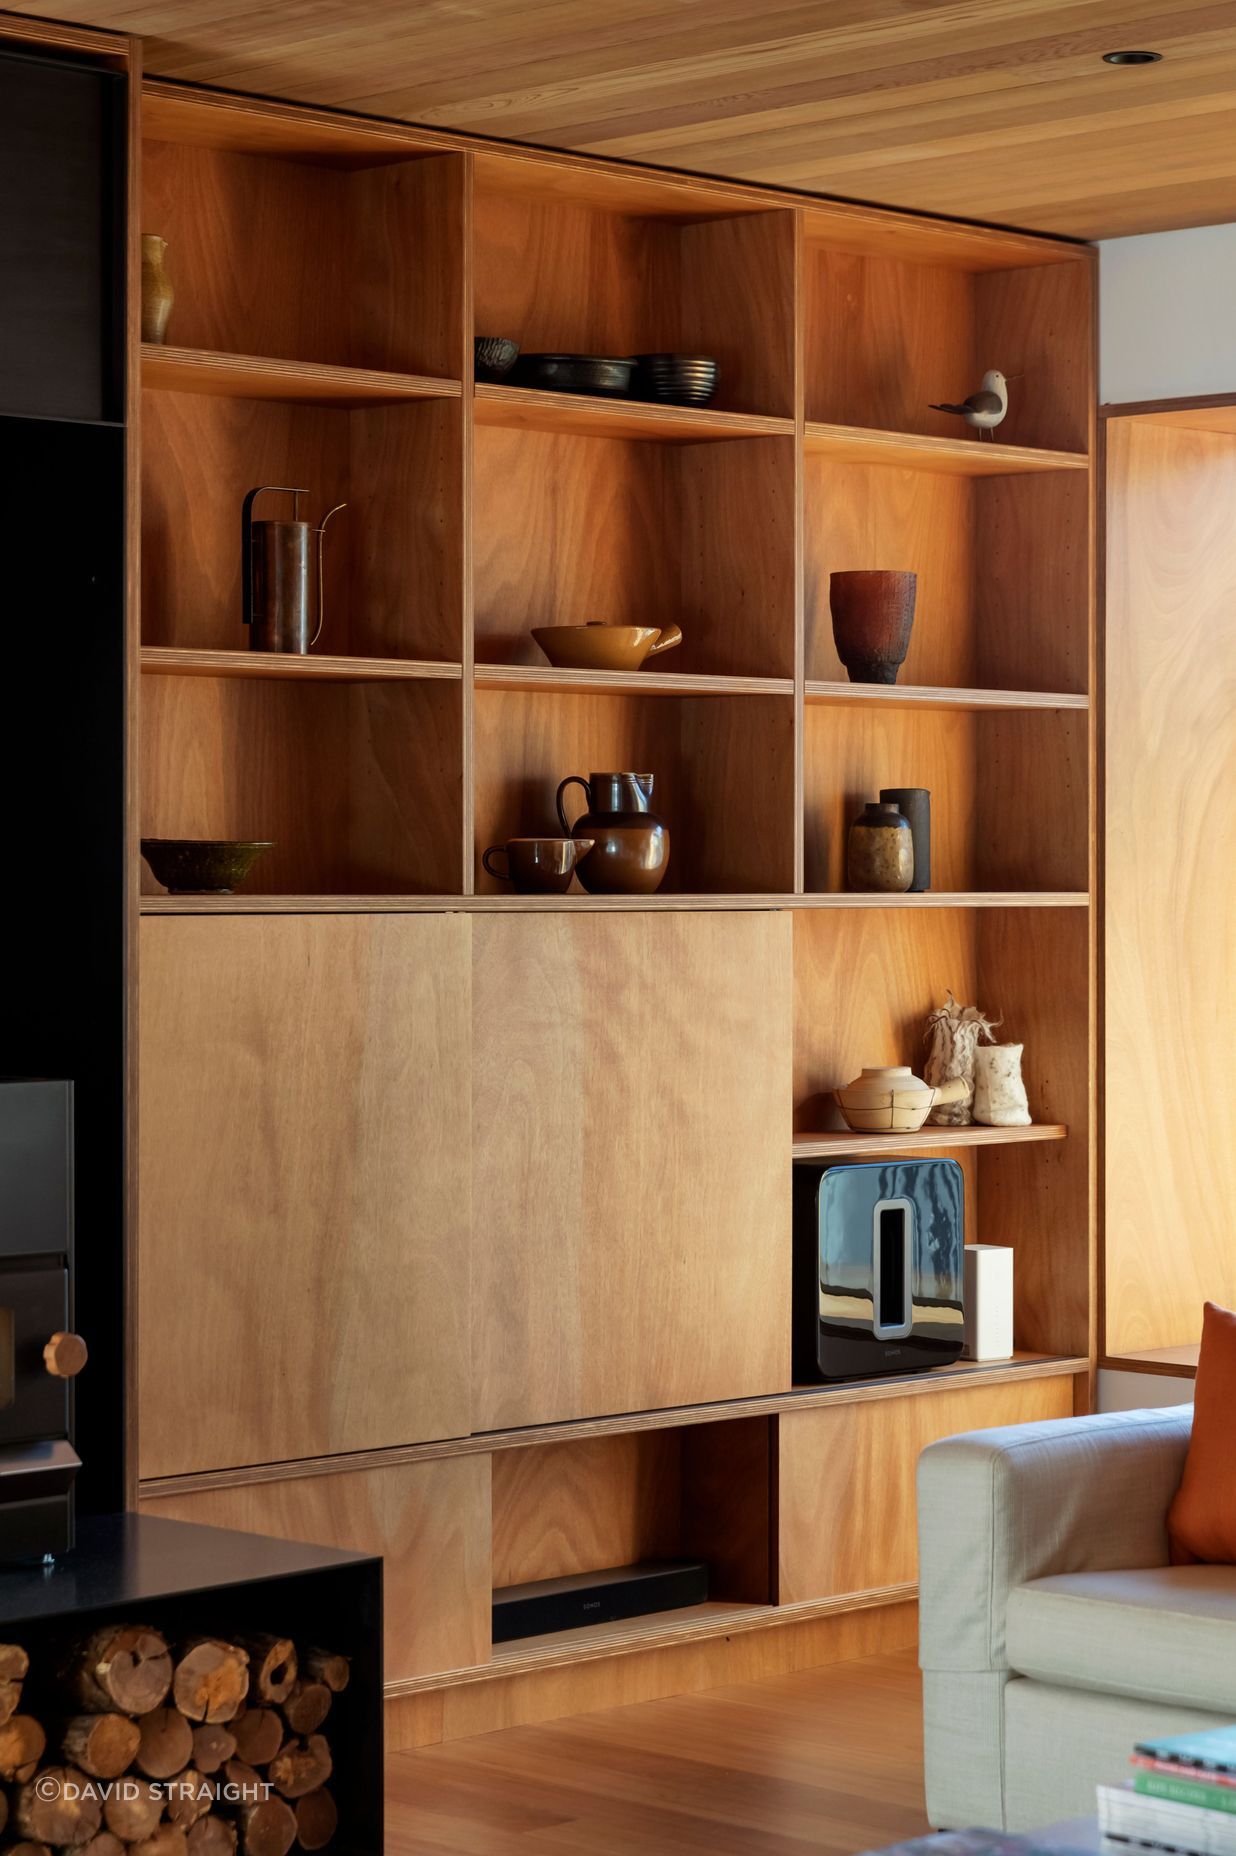 Timber bookshelves in the sitting area with sliding panels concealing a TV. “I was keen to use natural finishes and avoid paint wherever possible,” says Hamish.